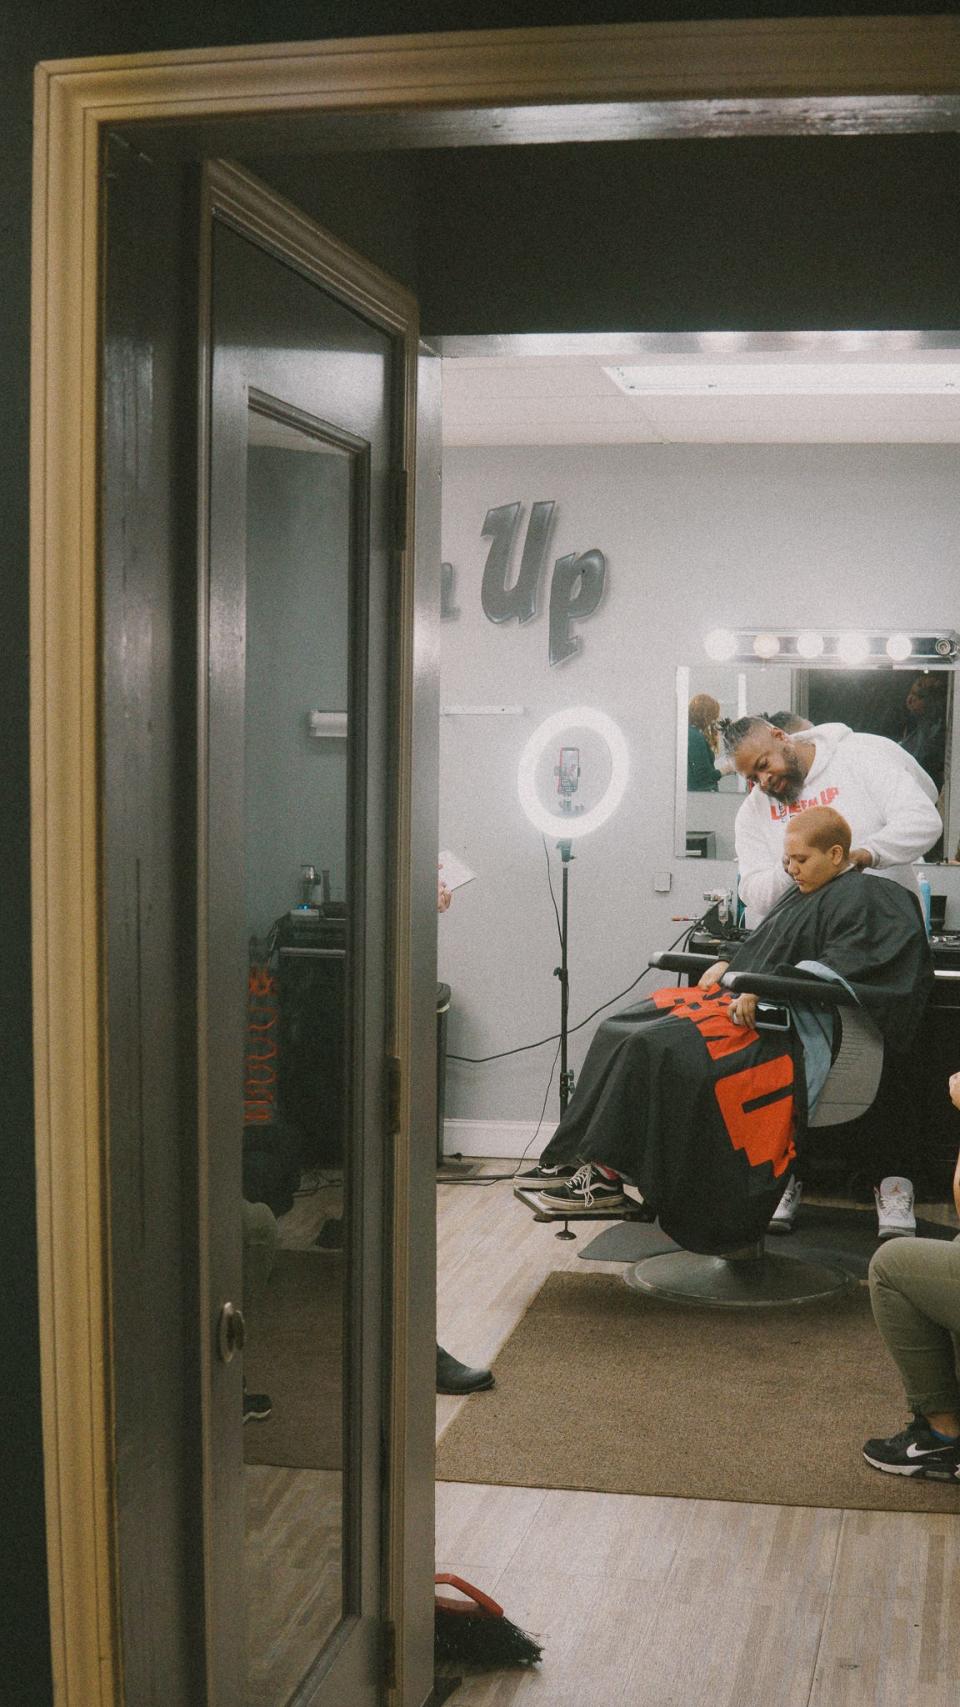 As a barber, LaVonn Wilson knows how to talk to people inside of his barbershop.